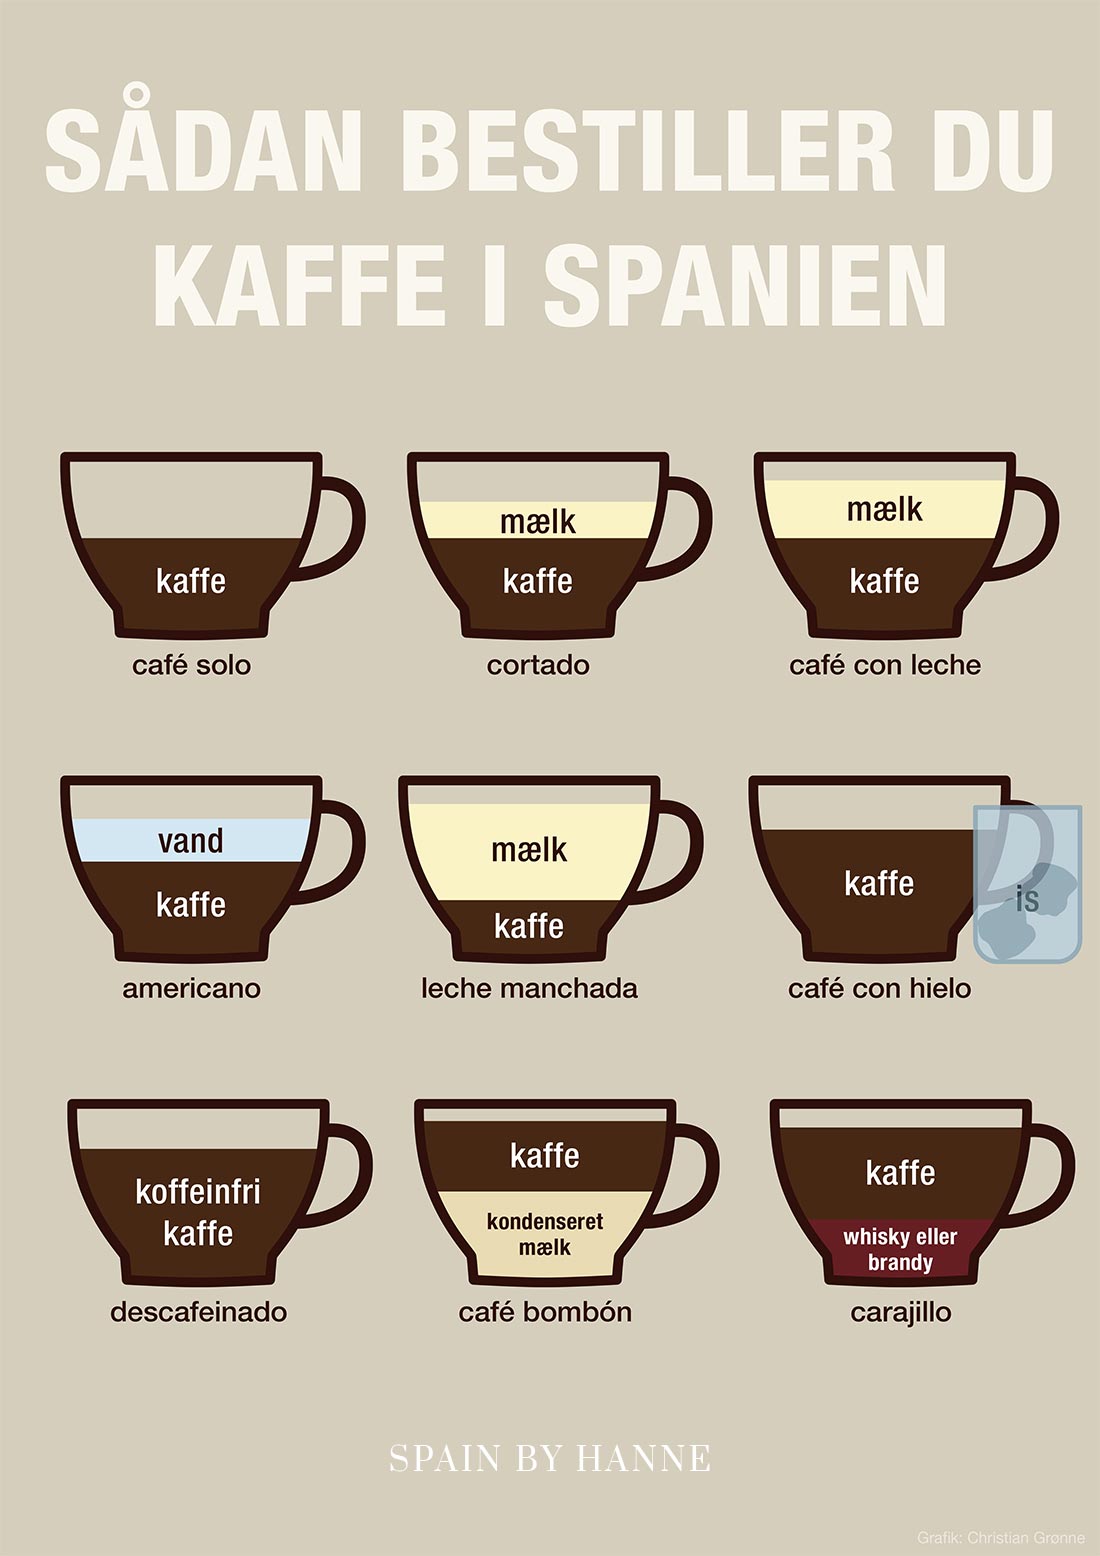 How to order coffee in Spain - infographic